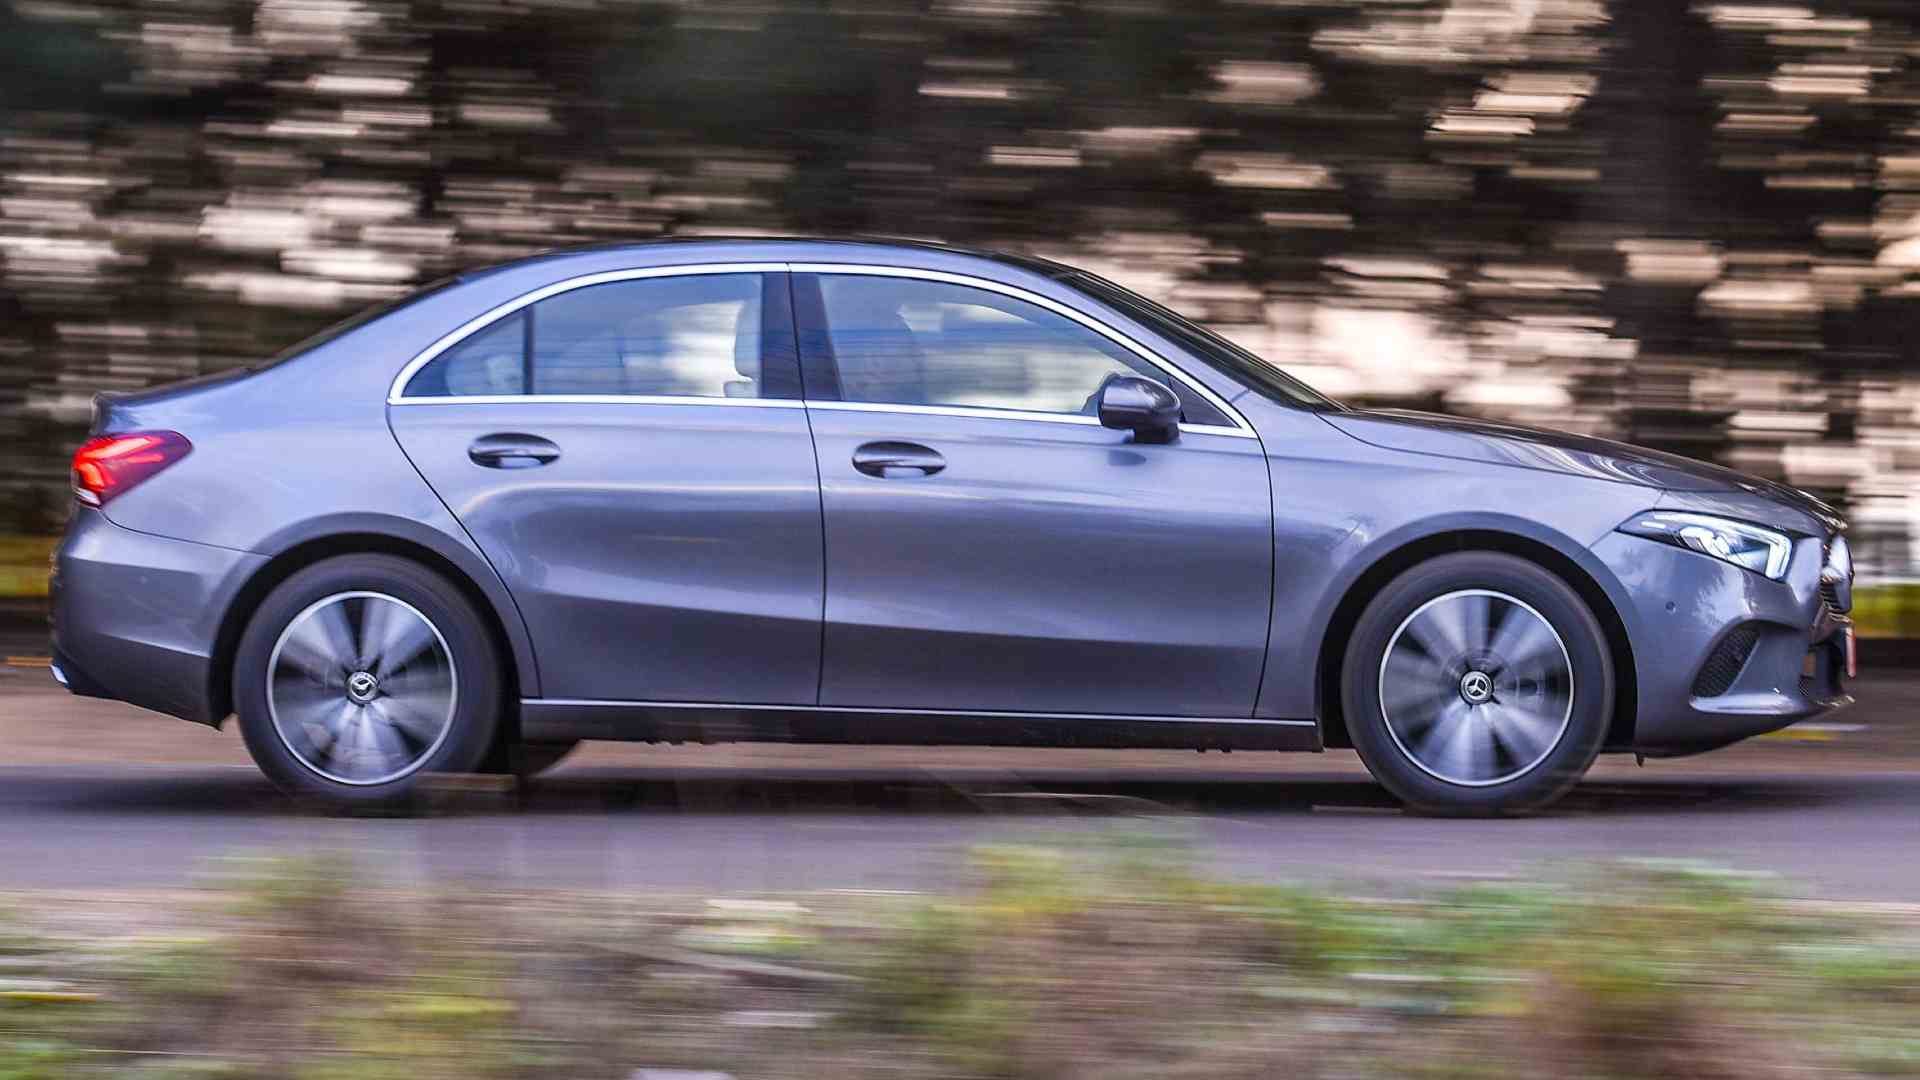 On the move, the A-Class Limousine feels agile and light on its feet. Image: Overdrive/Anis Shaikh